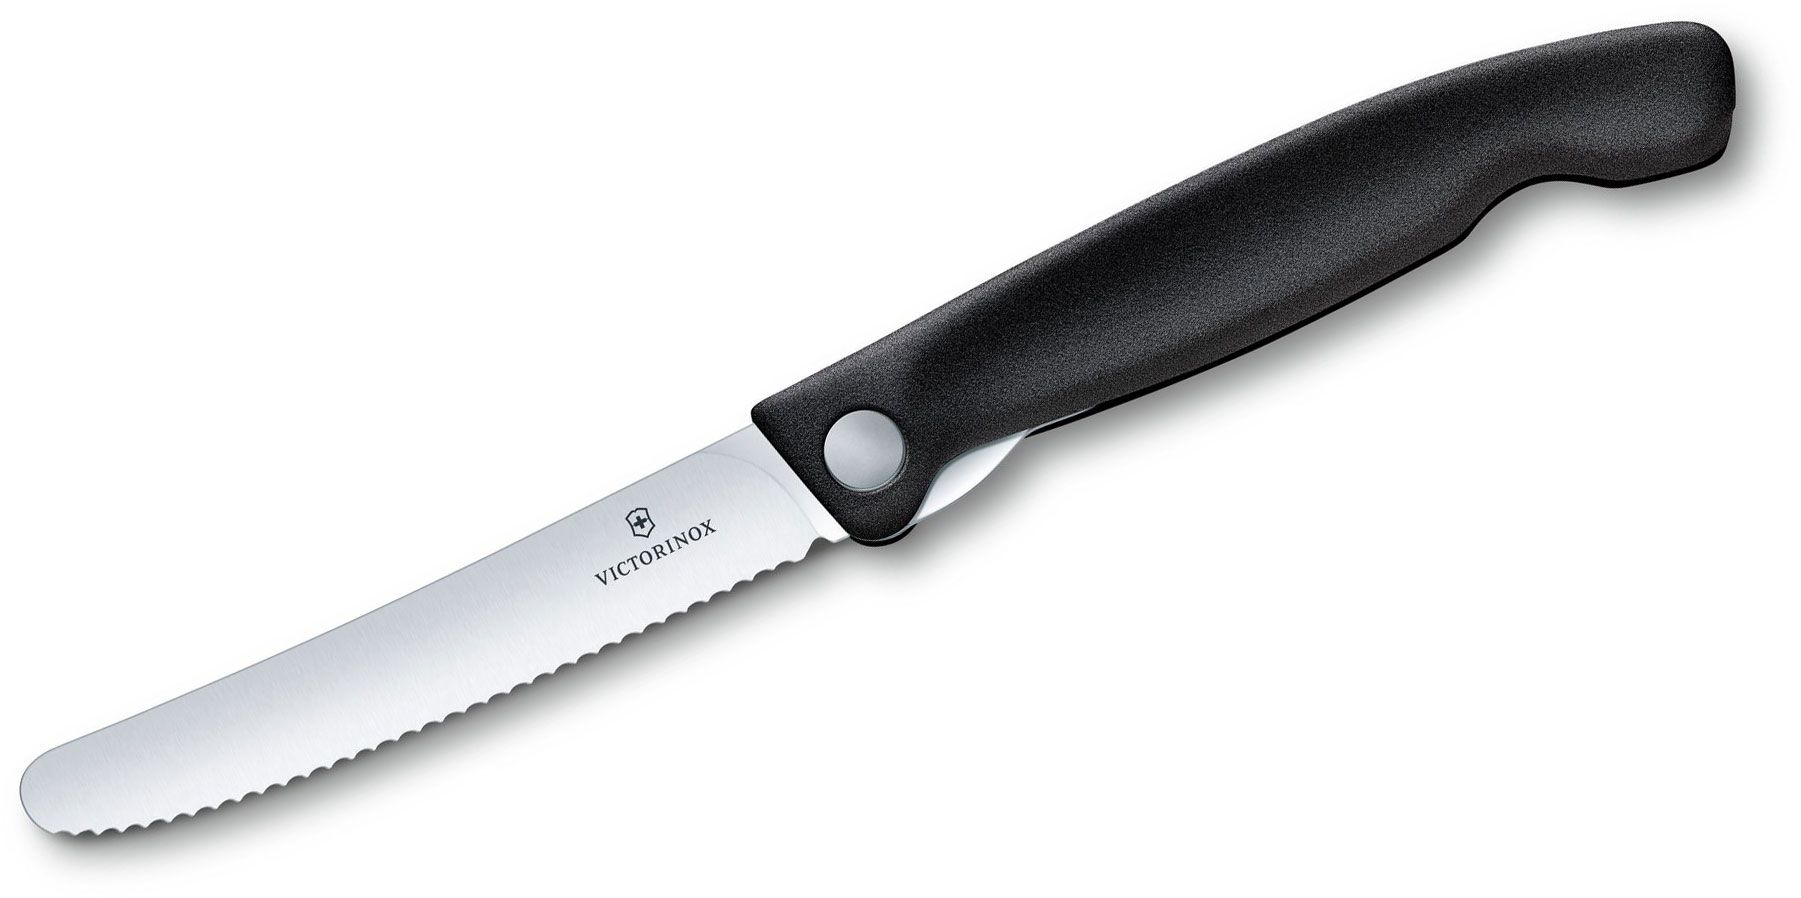 Choice 3 1/4 Serrated Edge Paring Knife with White Handle